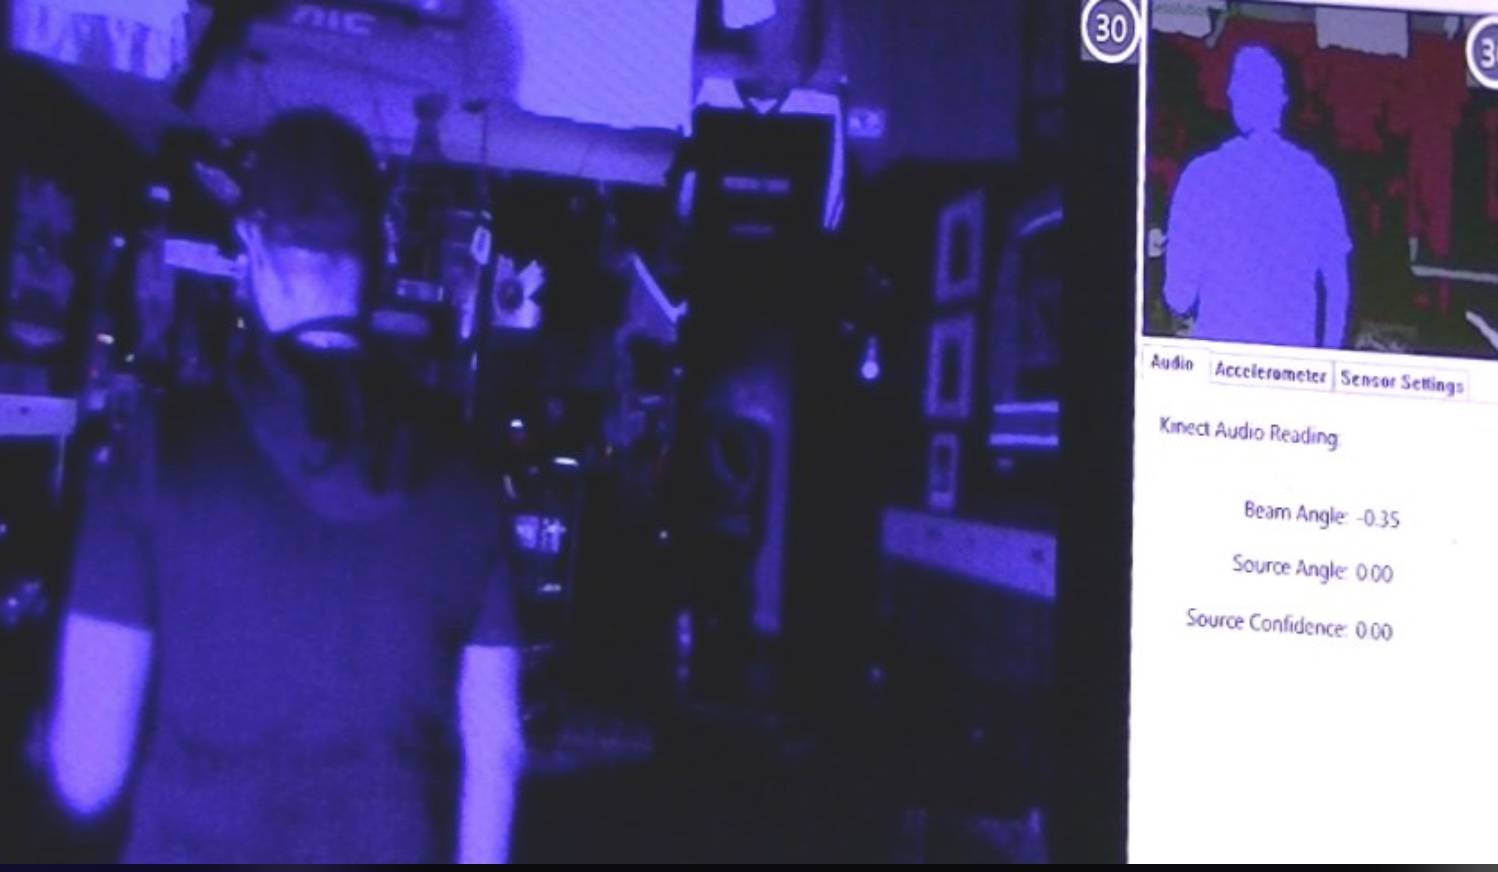 Danny Nunes as seen through one of the cameras during Paranormal North Coast British Columbia’s investigation at PF Bistro in Kitimat. (Photo from Paranormal North Coast British Columbia’s Facebook page)